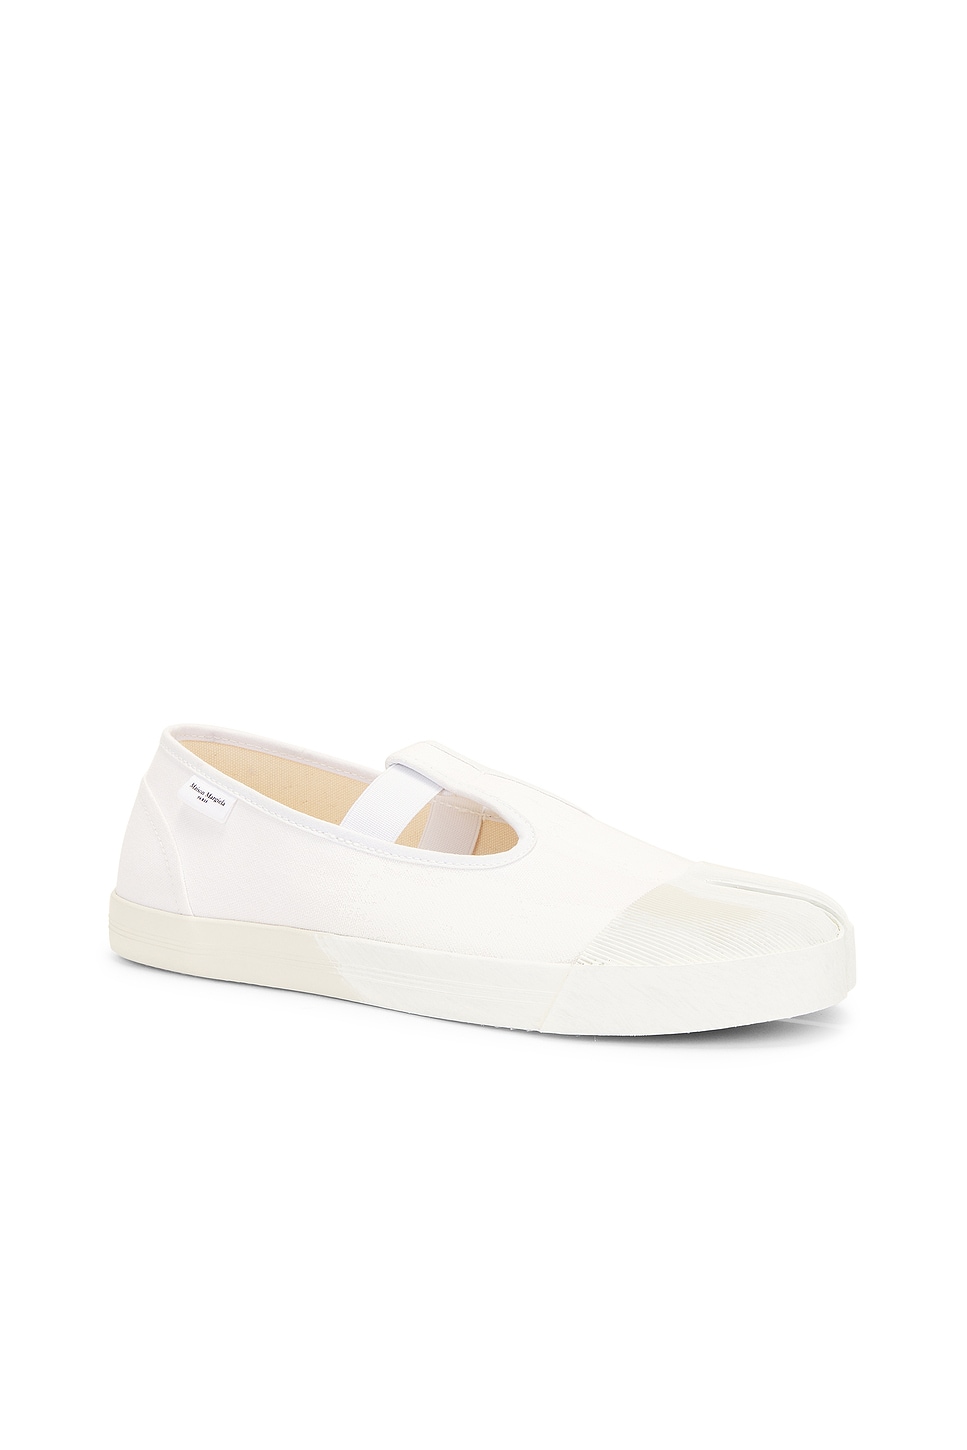 Shop Maison Margiela On The Deck Tabi Mary Jane Sneaker In White & Mat Bianchetto